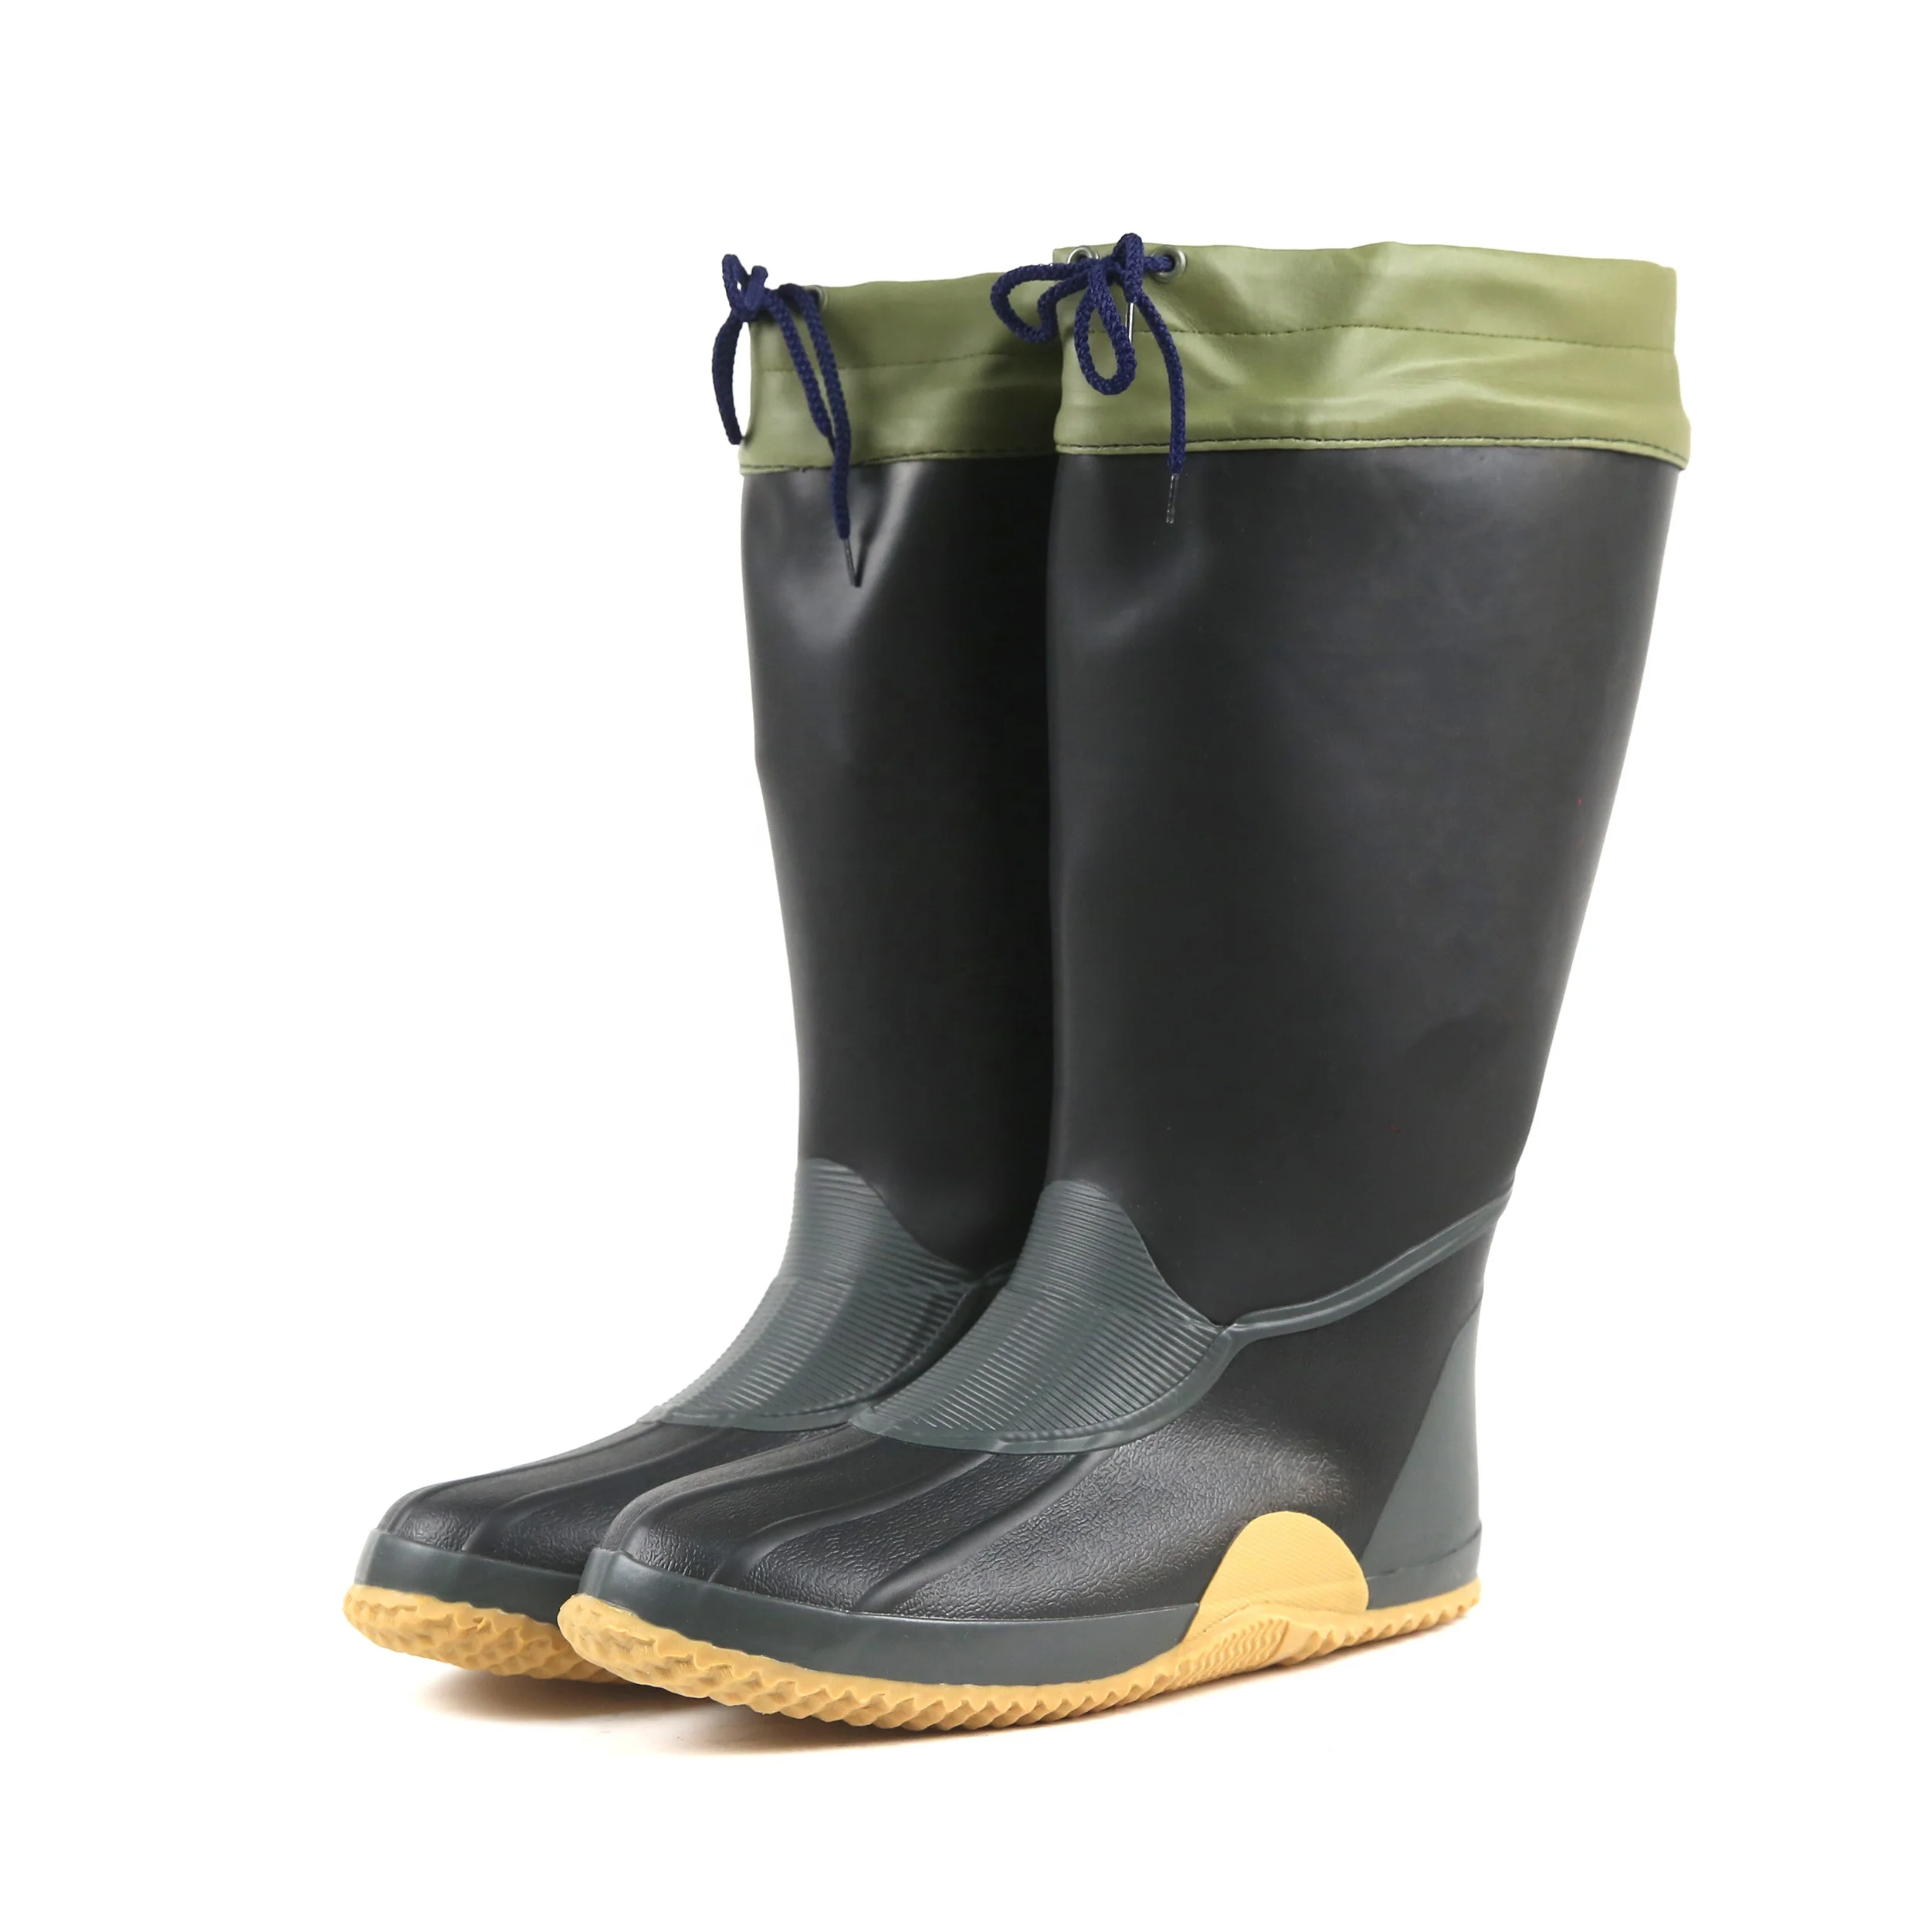 Cheap Shoes,Skid Resistant,Rubber Boots 